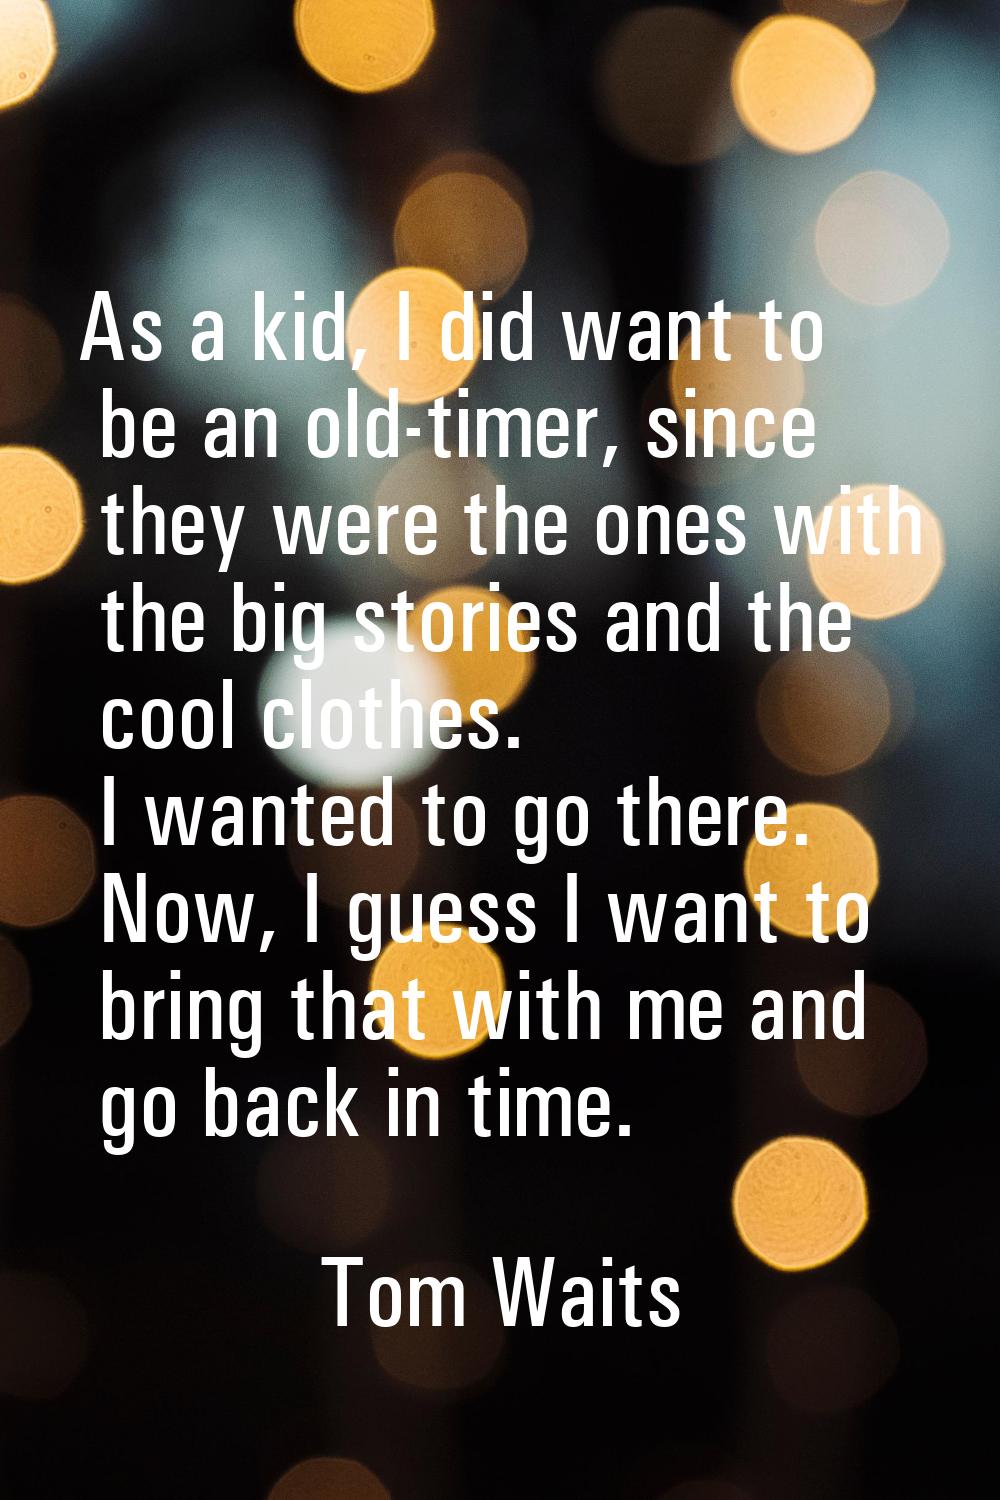 As a kid, I did want to be an old-timer, since they were the ones with the big stories and the cool